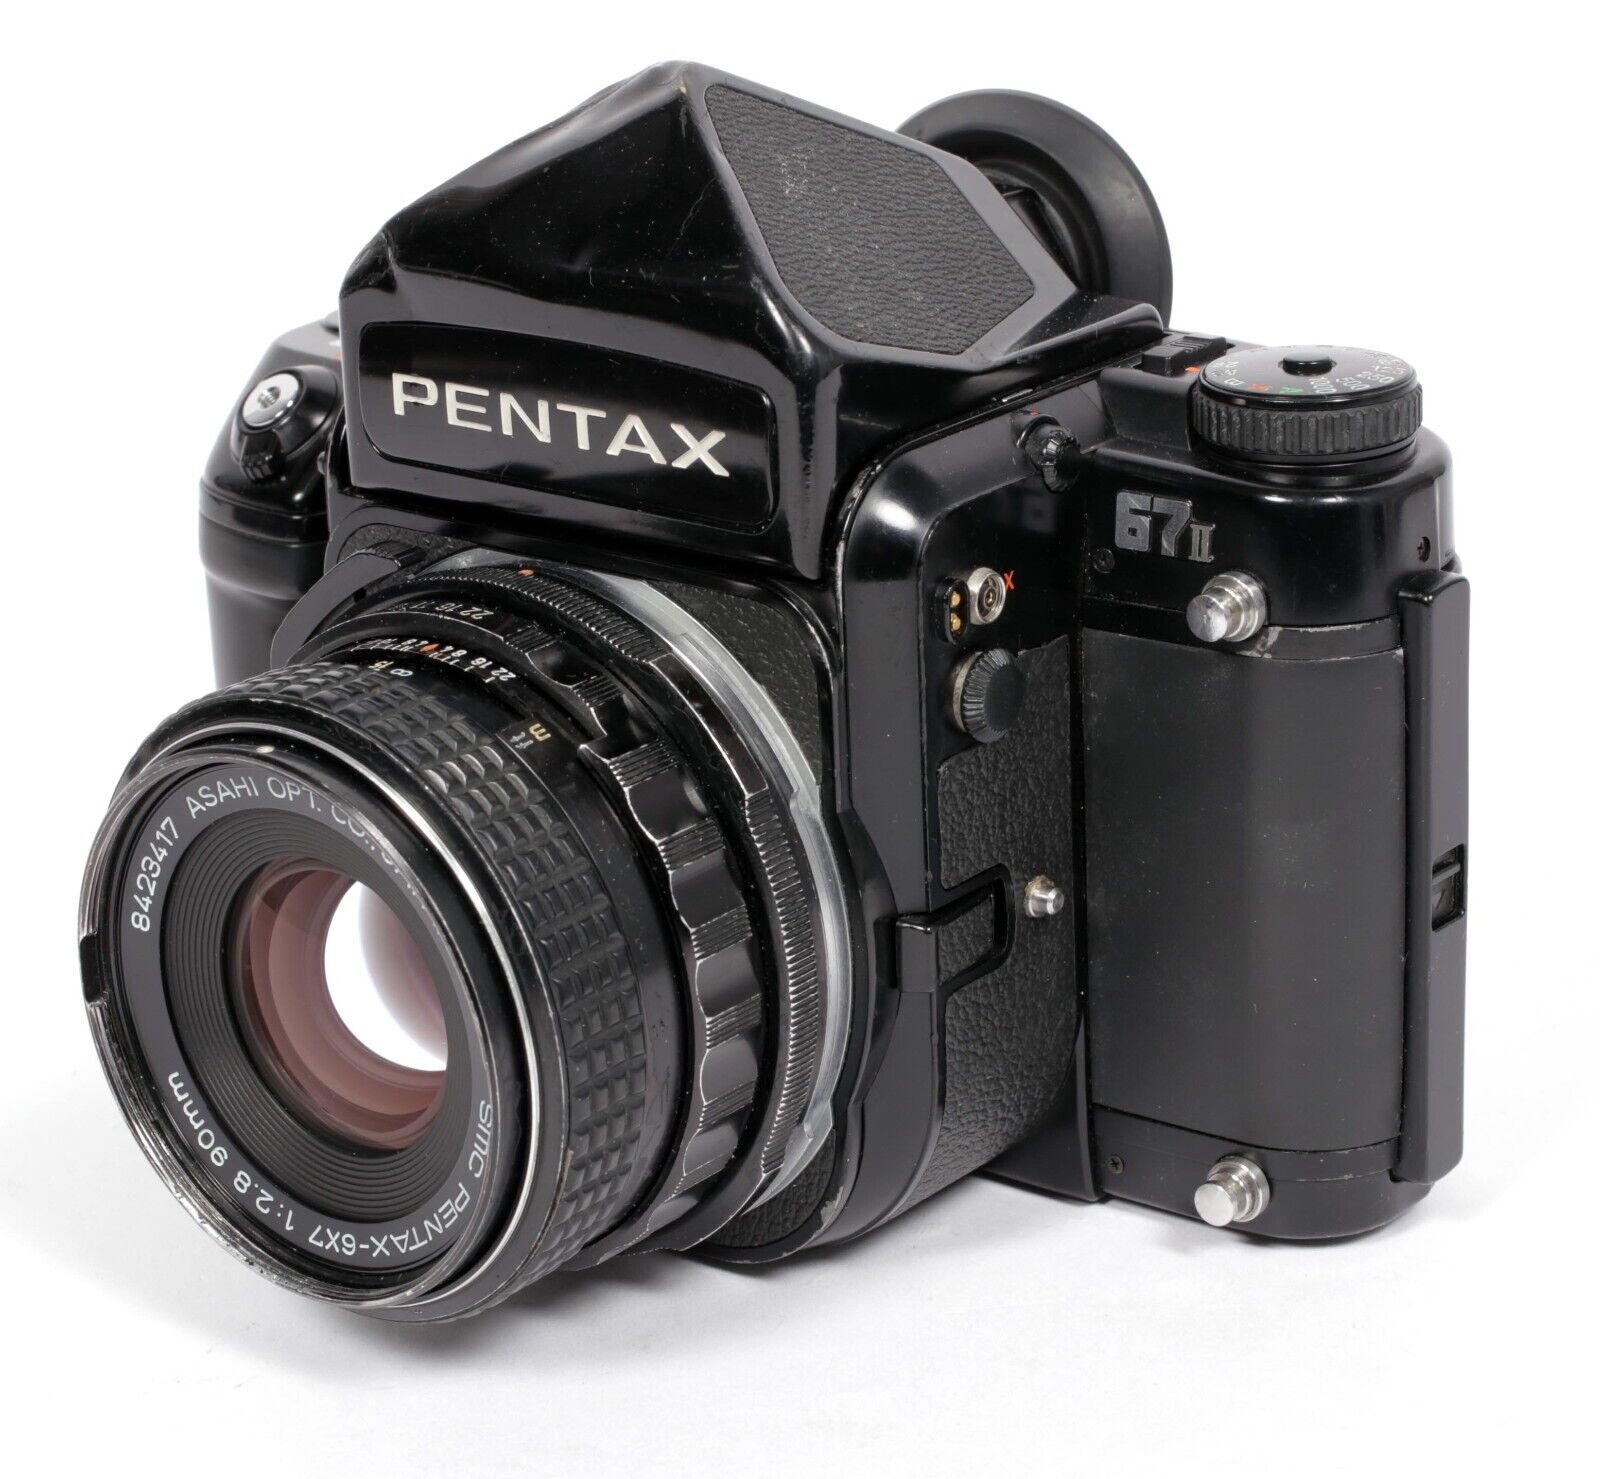 Pentax 67 II 6X7 camera with SMC 90mm F2.8 lens | CatLABS